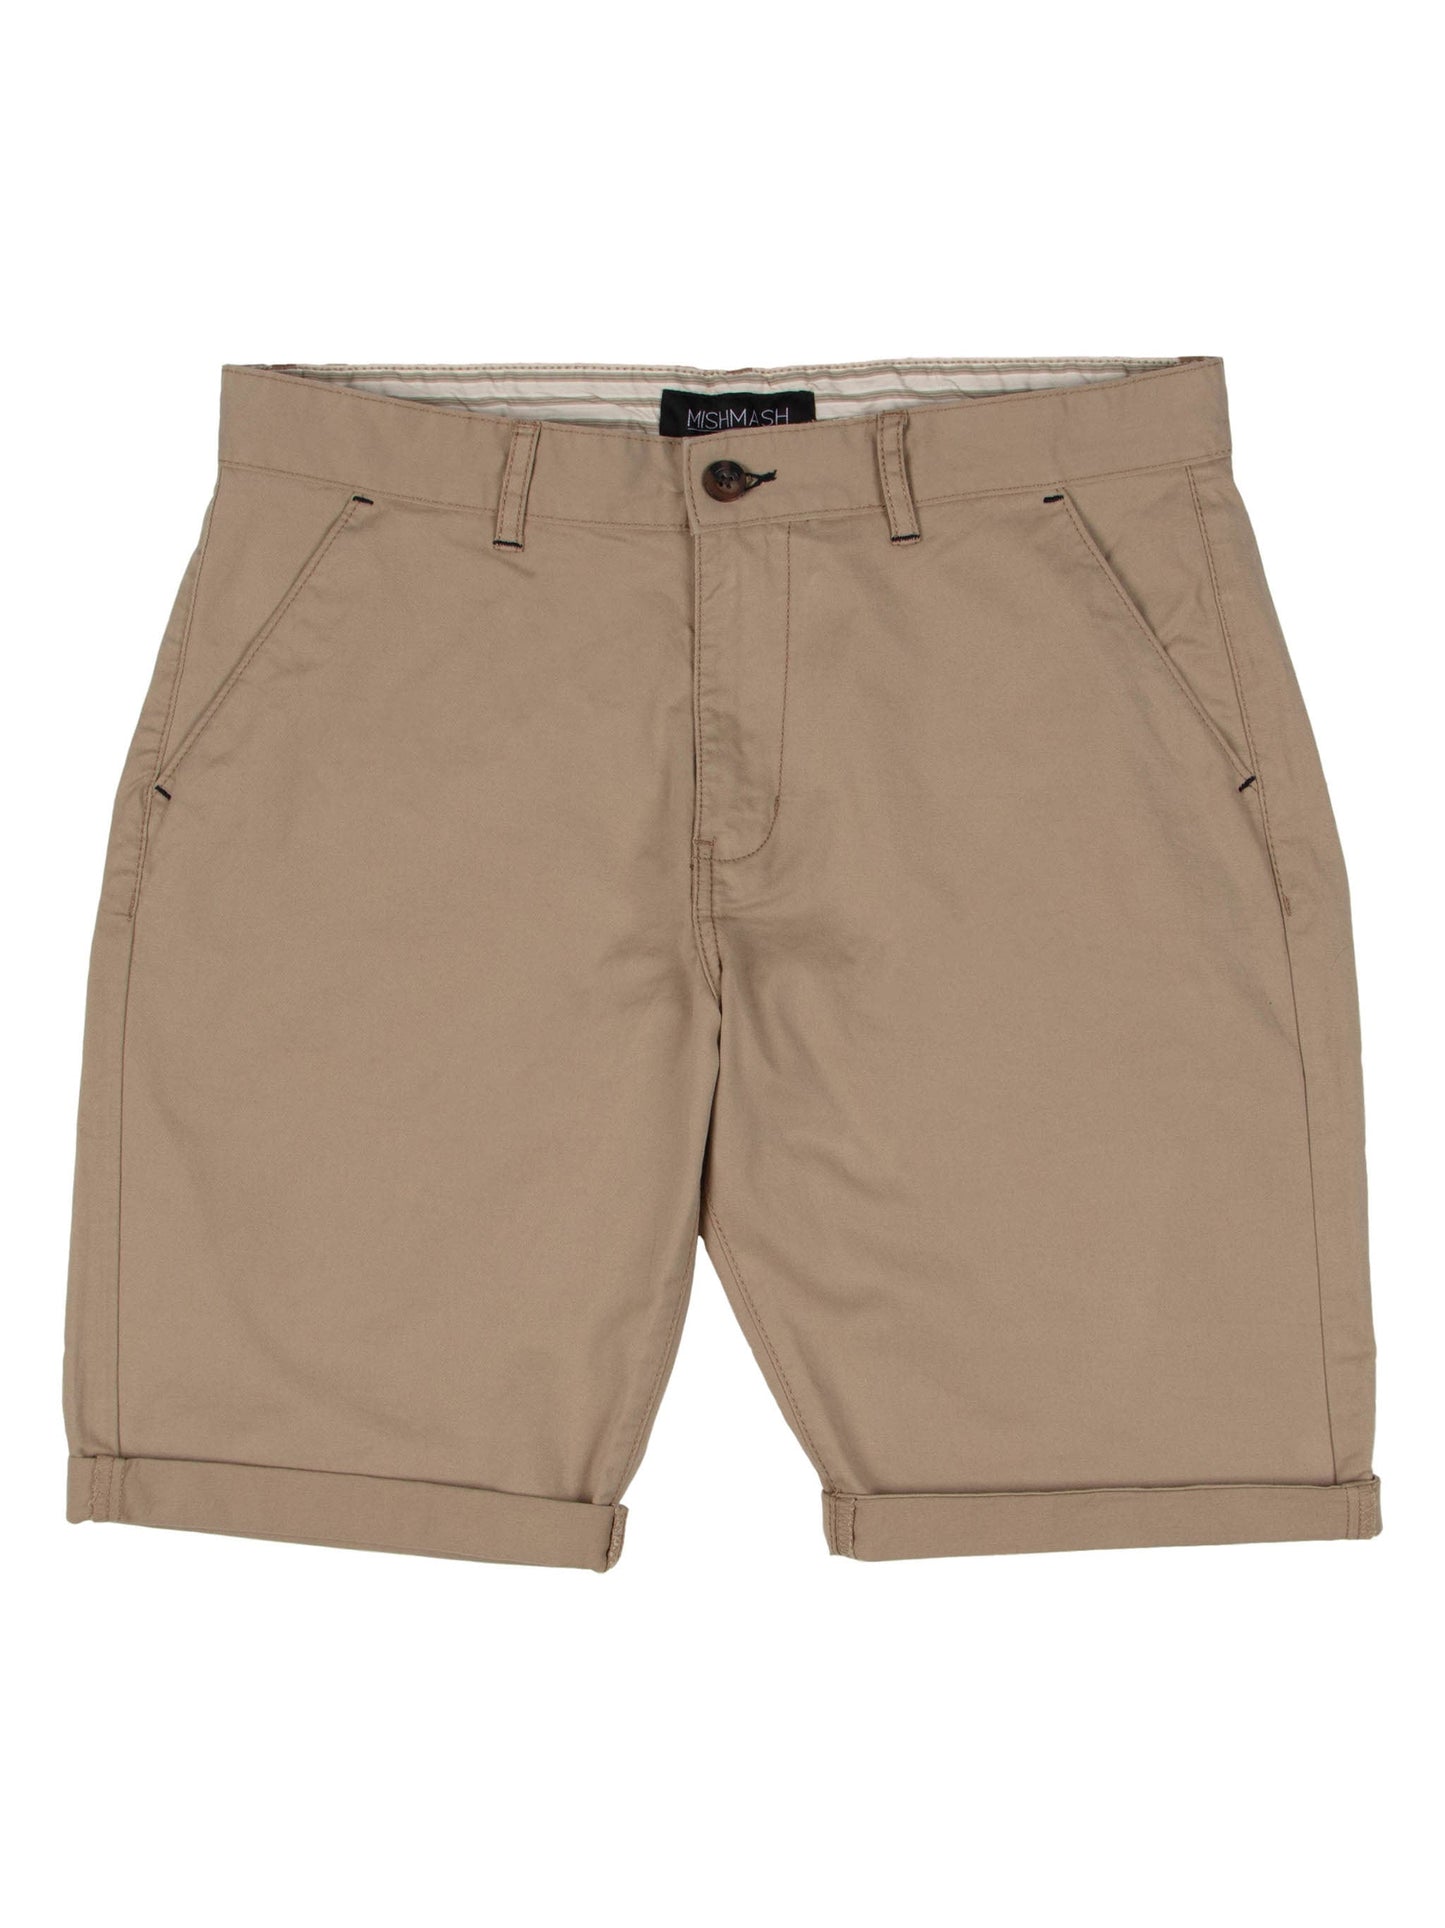 Regular fit mens classic chino shorts for summer cotton stone beige stretch mish mash jeans